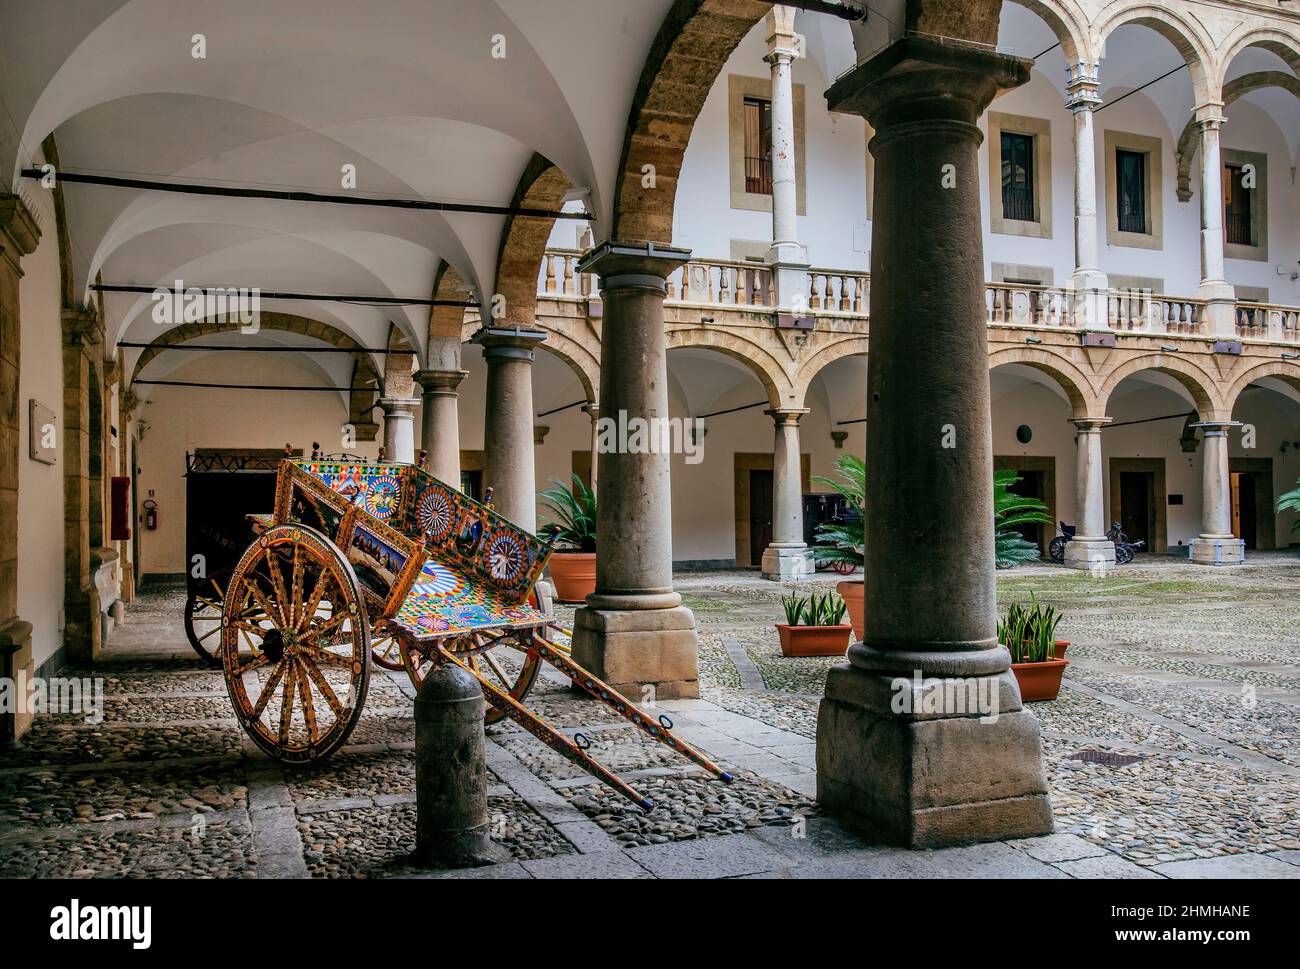 Courtyard with colorful Sicilian cart in the Palazzo Reale (Palazzo dei Normanni), Palermo, Sicily, Italy Stock Photo